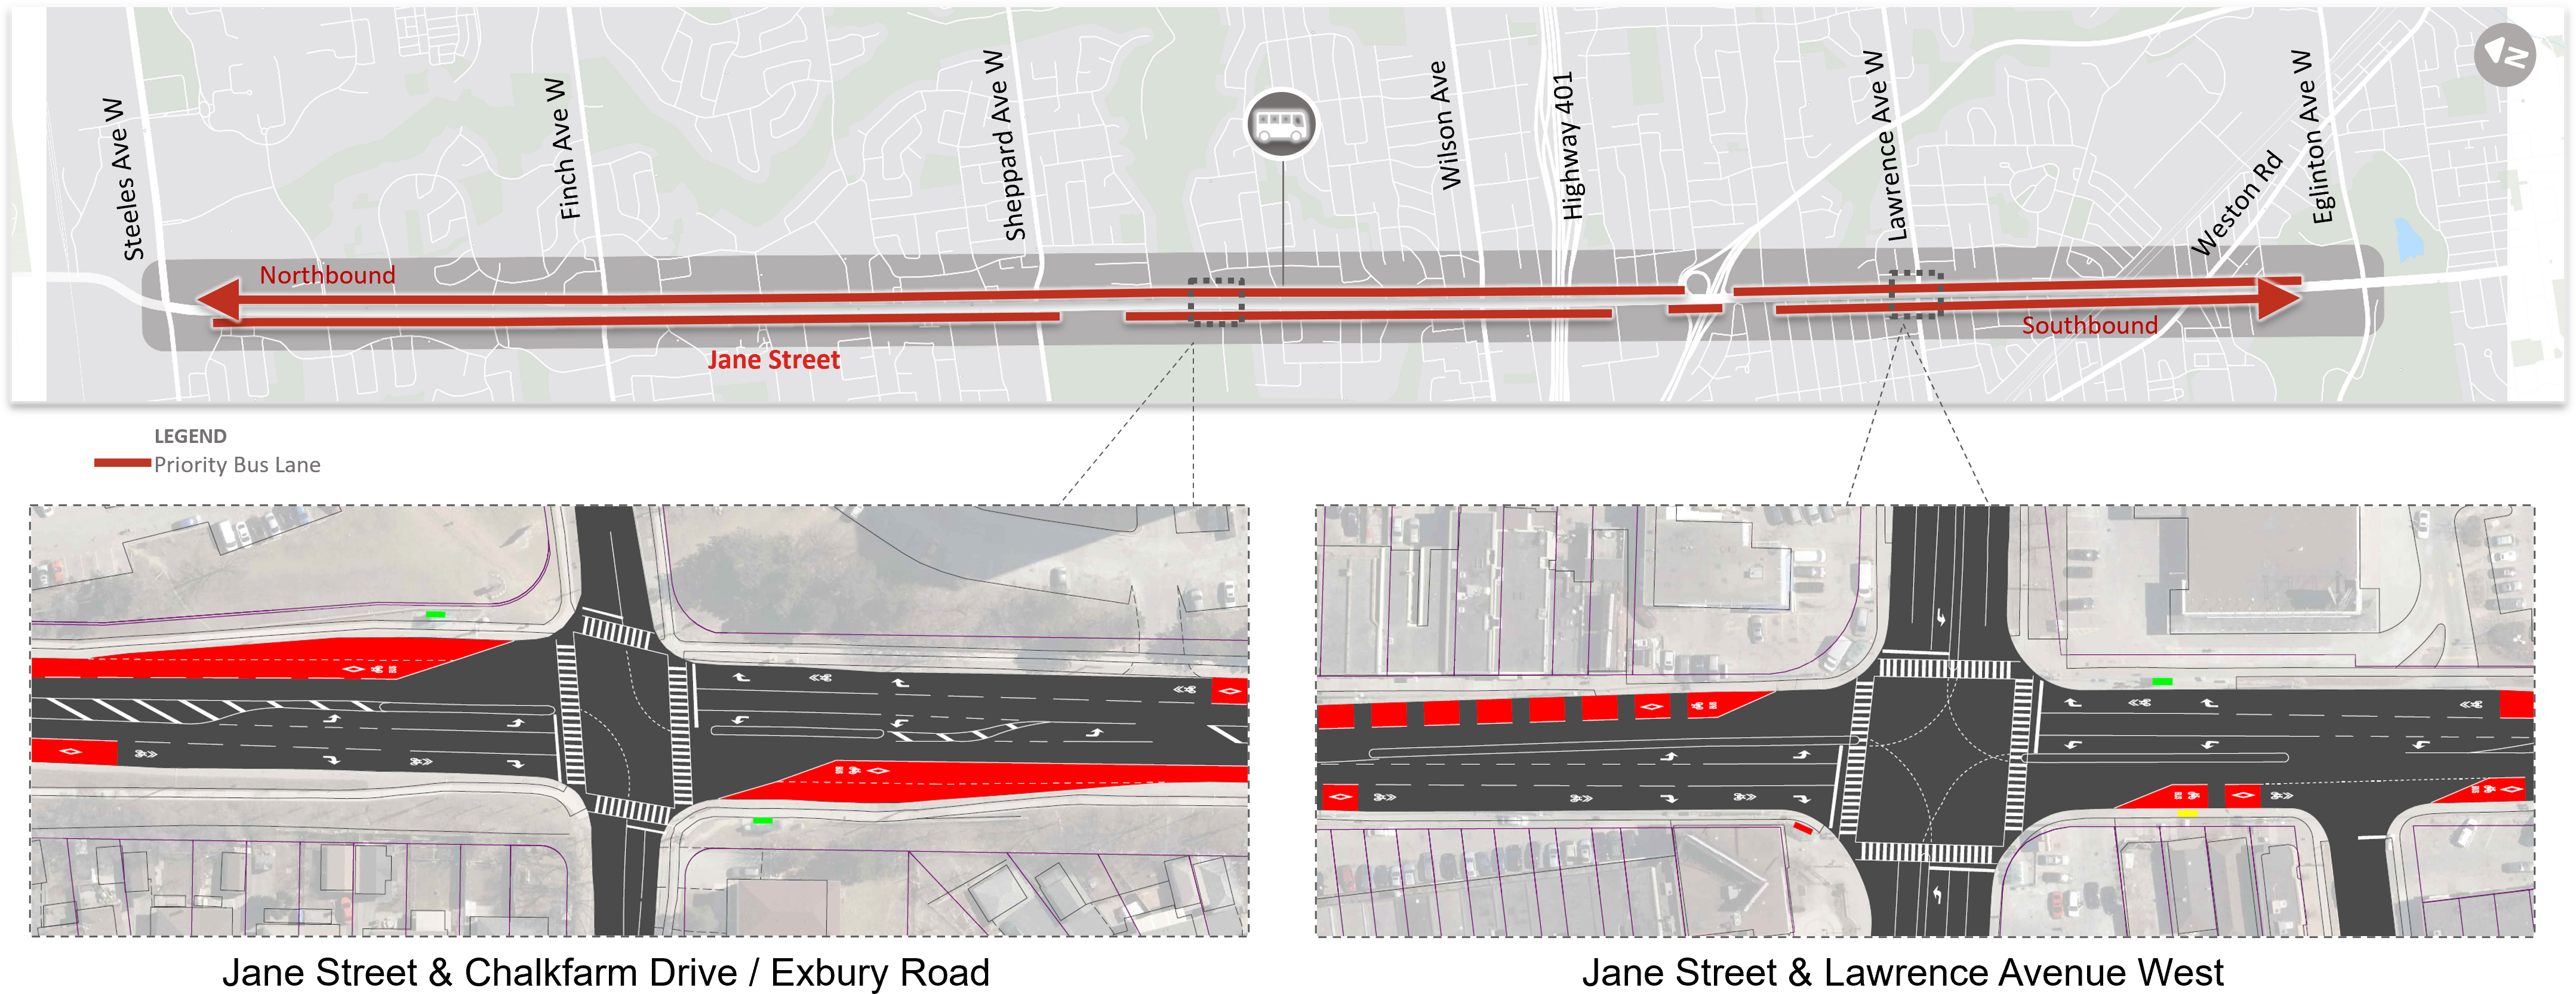 Conceptual map of Jane Street showing mixed-traffic curb lanes converted to continuous, curbside priority bus lanes (shown by red paint) for buses (including school buses), emergency vehicles and bicycles.